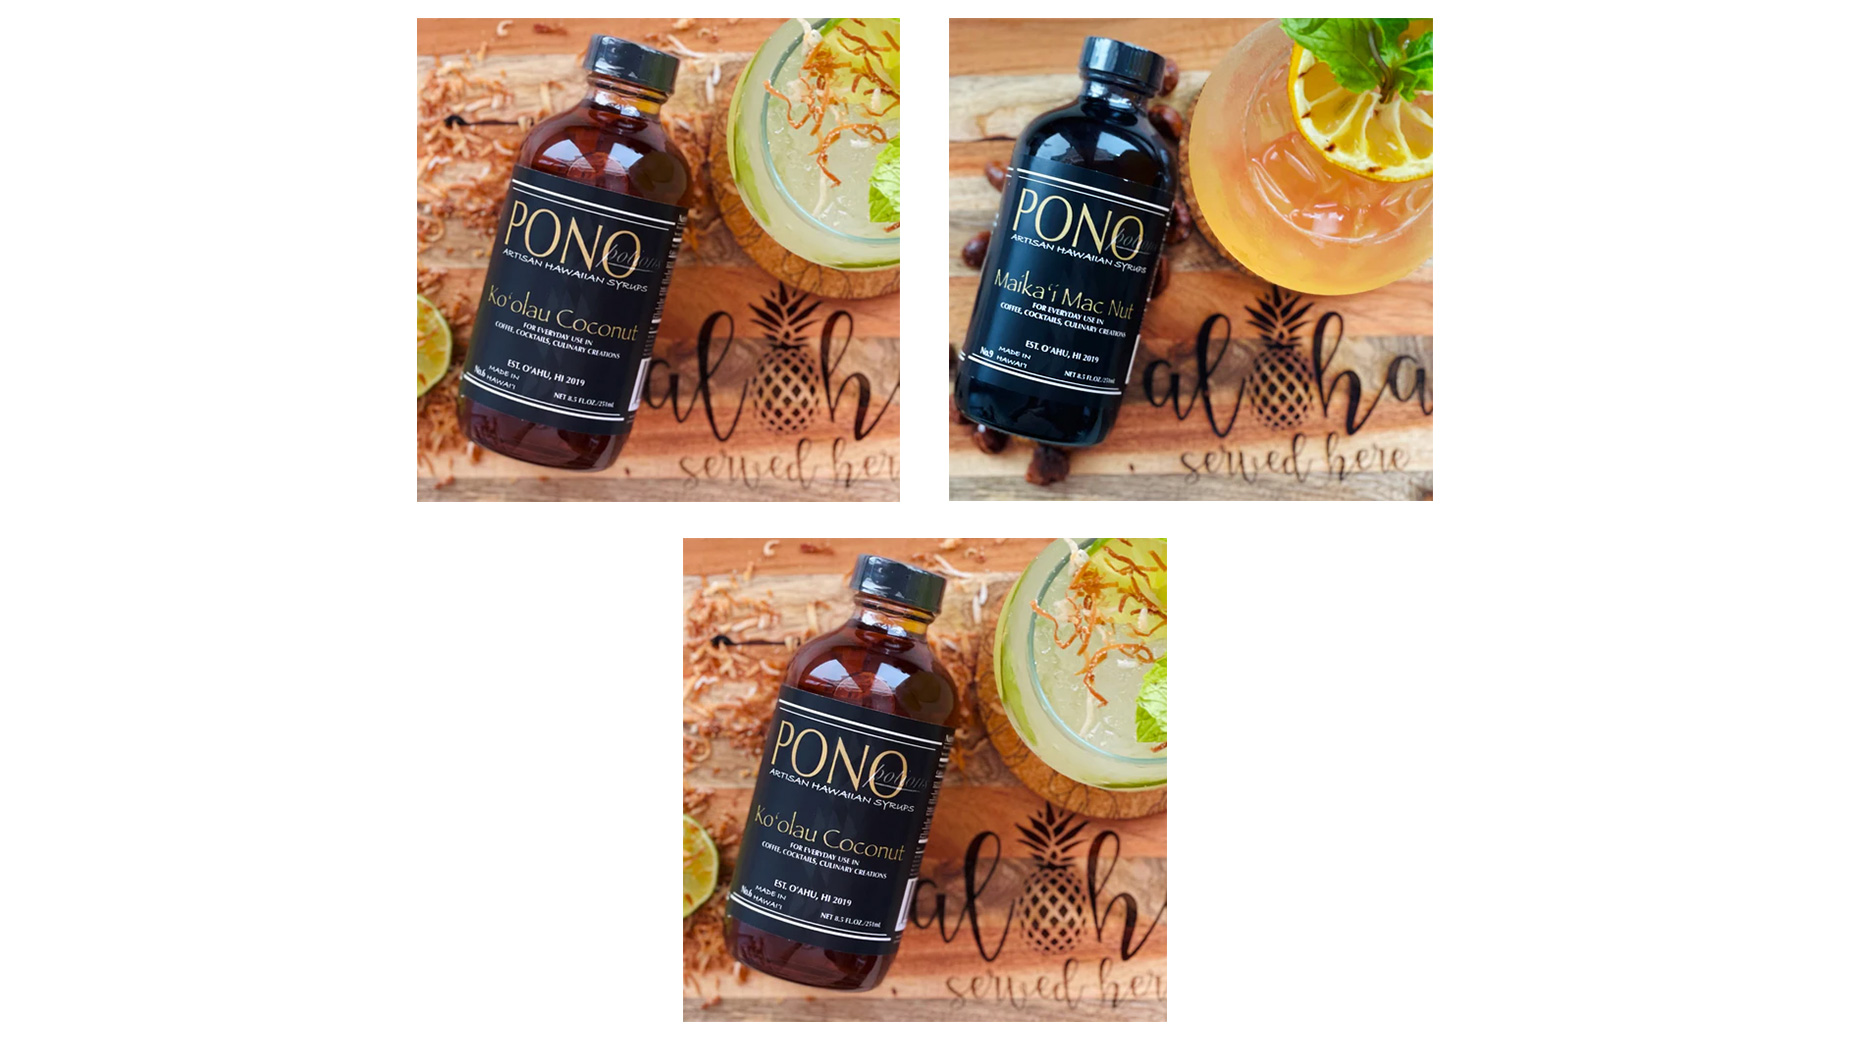 Pono Potions products